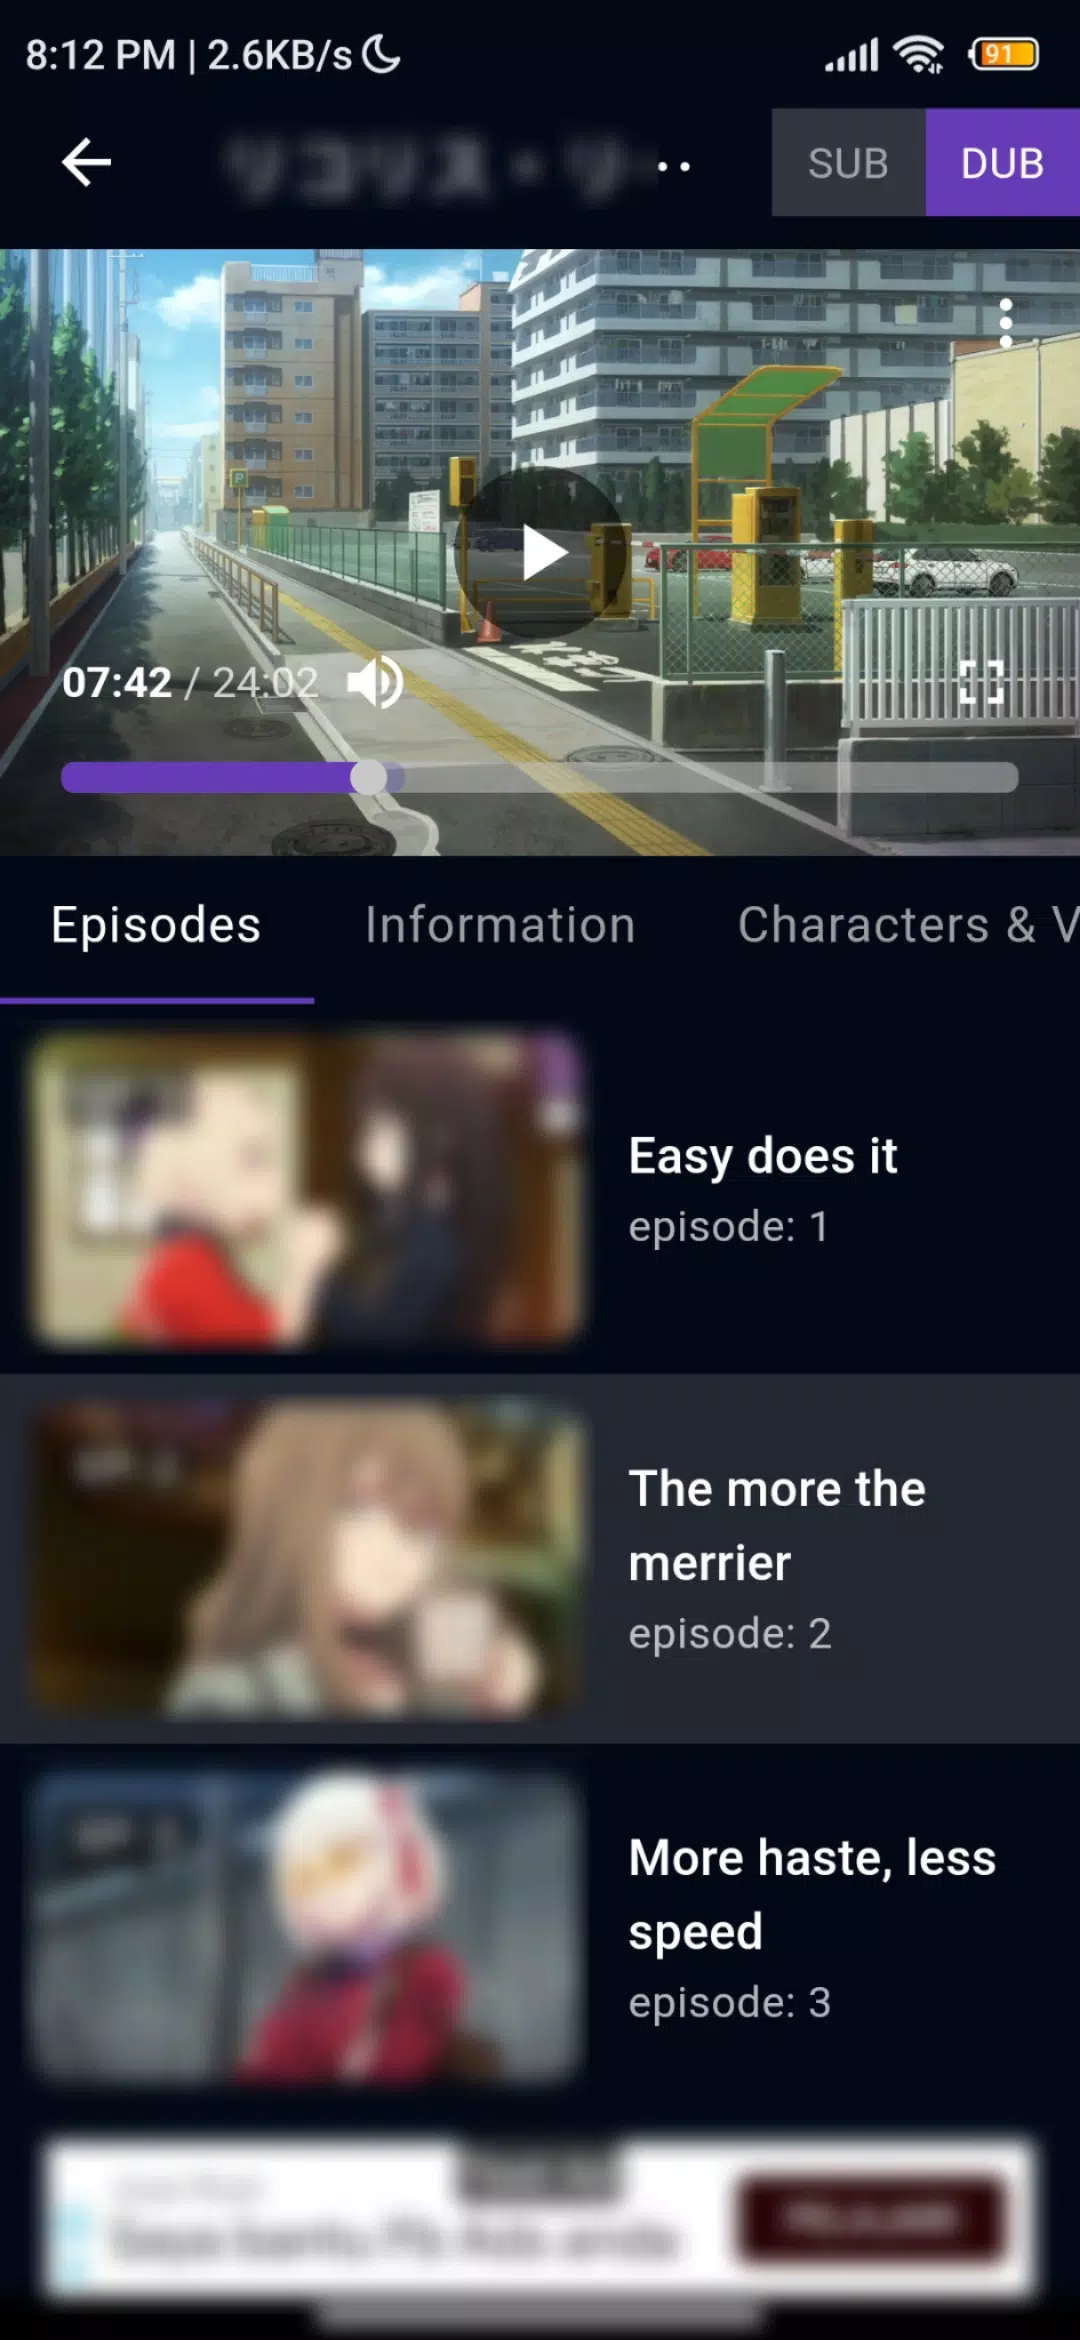 AnimeFlix - Anime TV for Android - Download